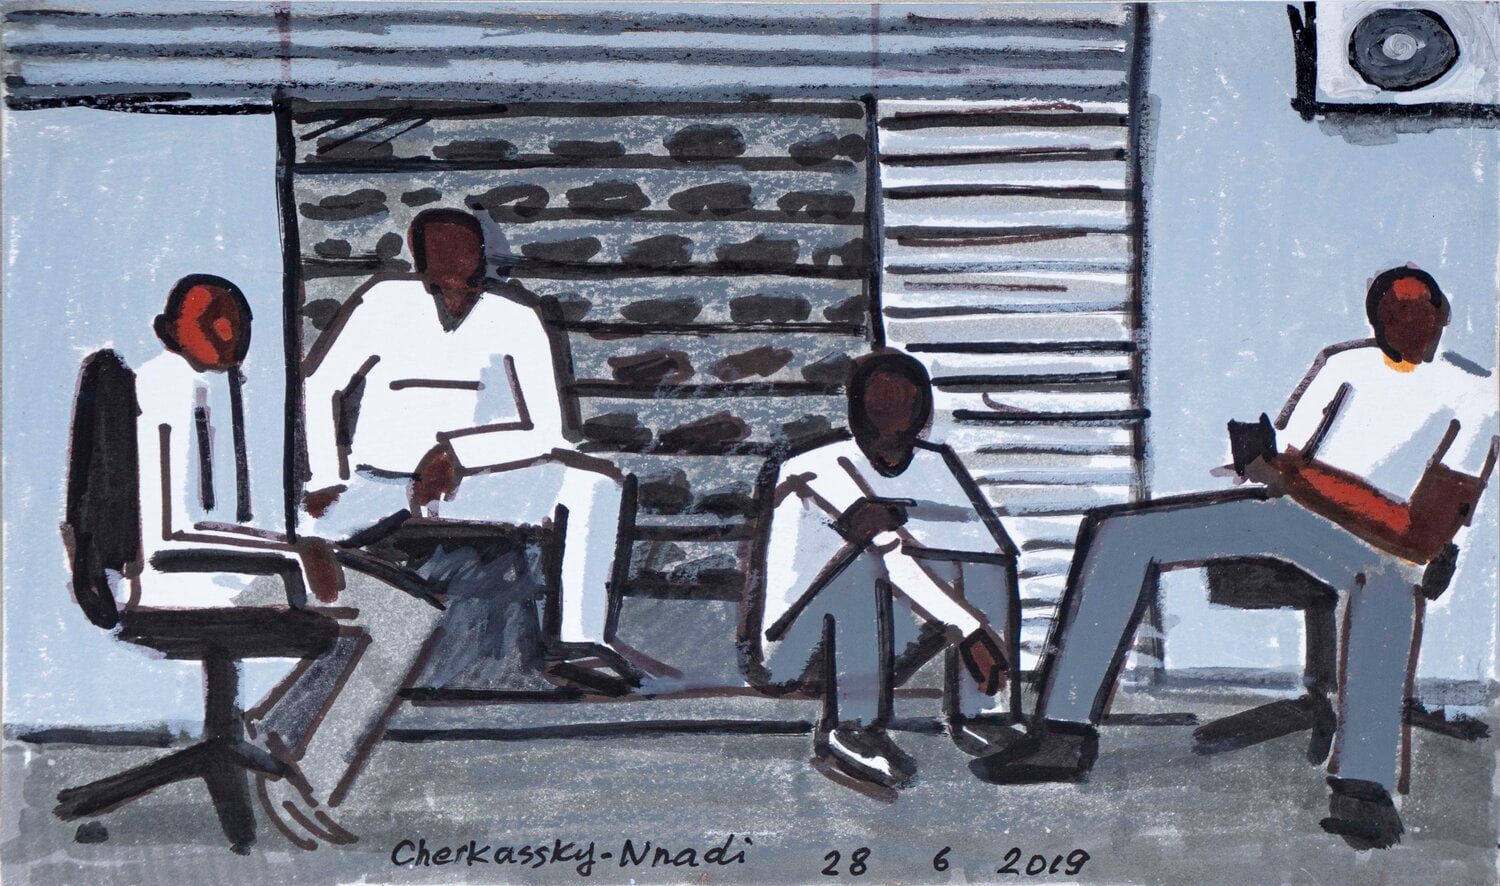 Zoya Cherkassky
Sudanese Shoe Shop, 2019
Markers on paper
6 x 9 inches